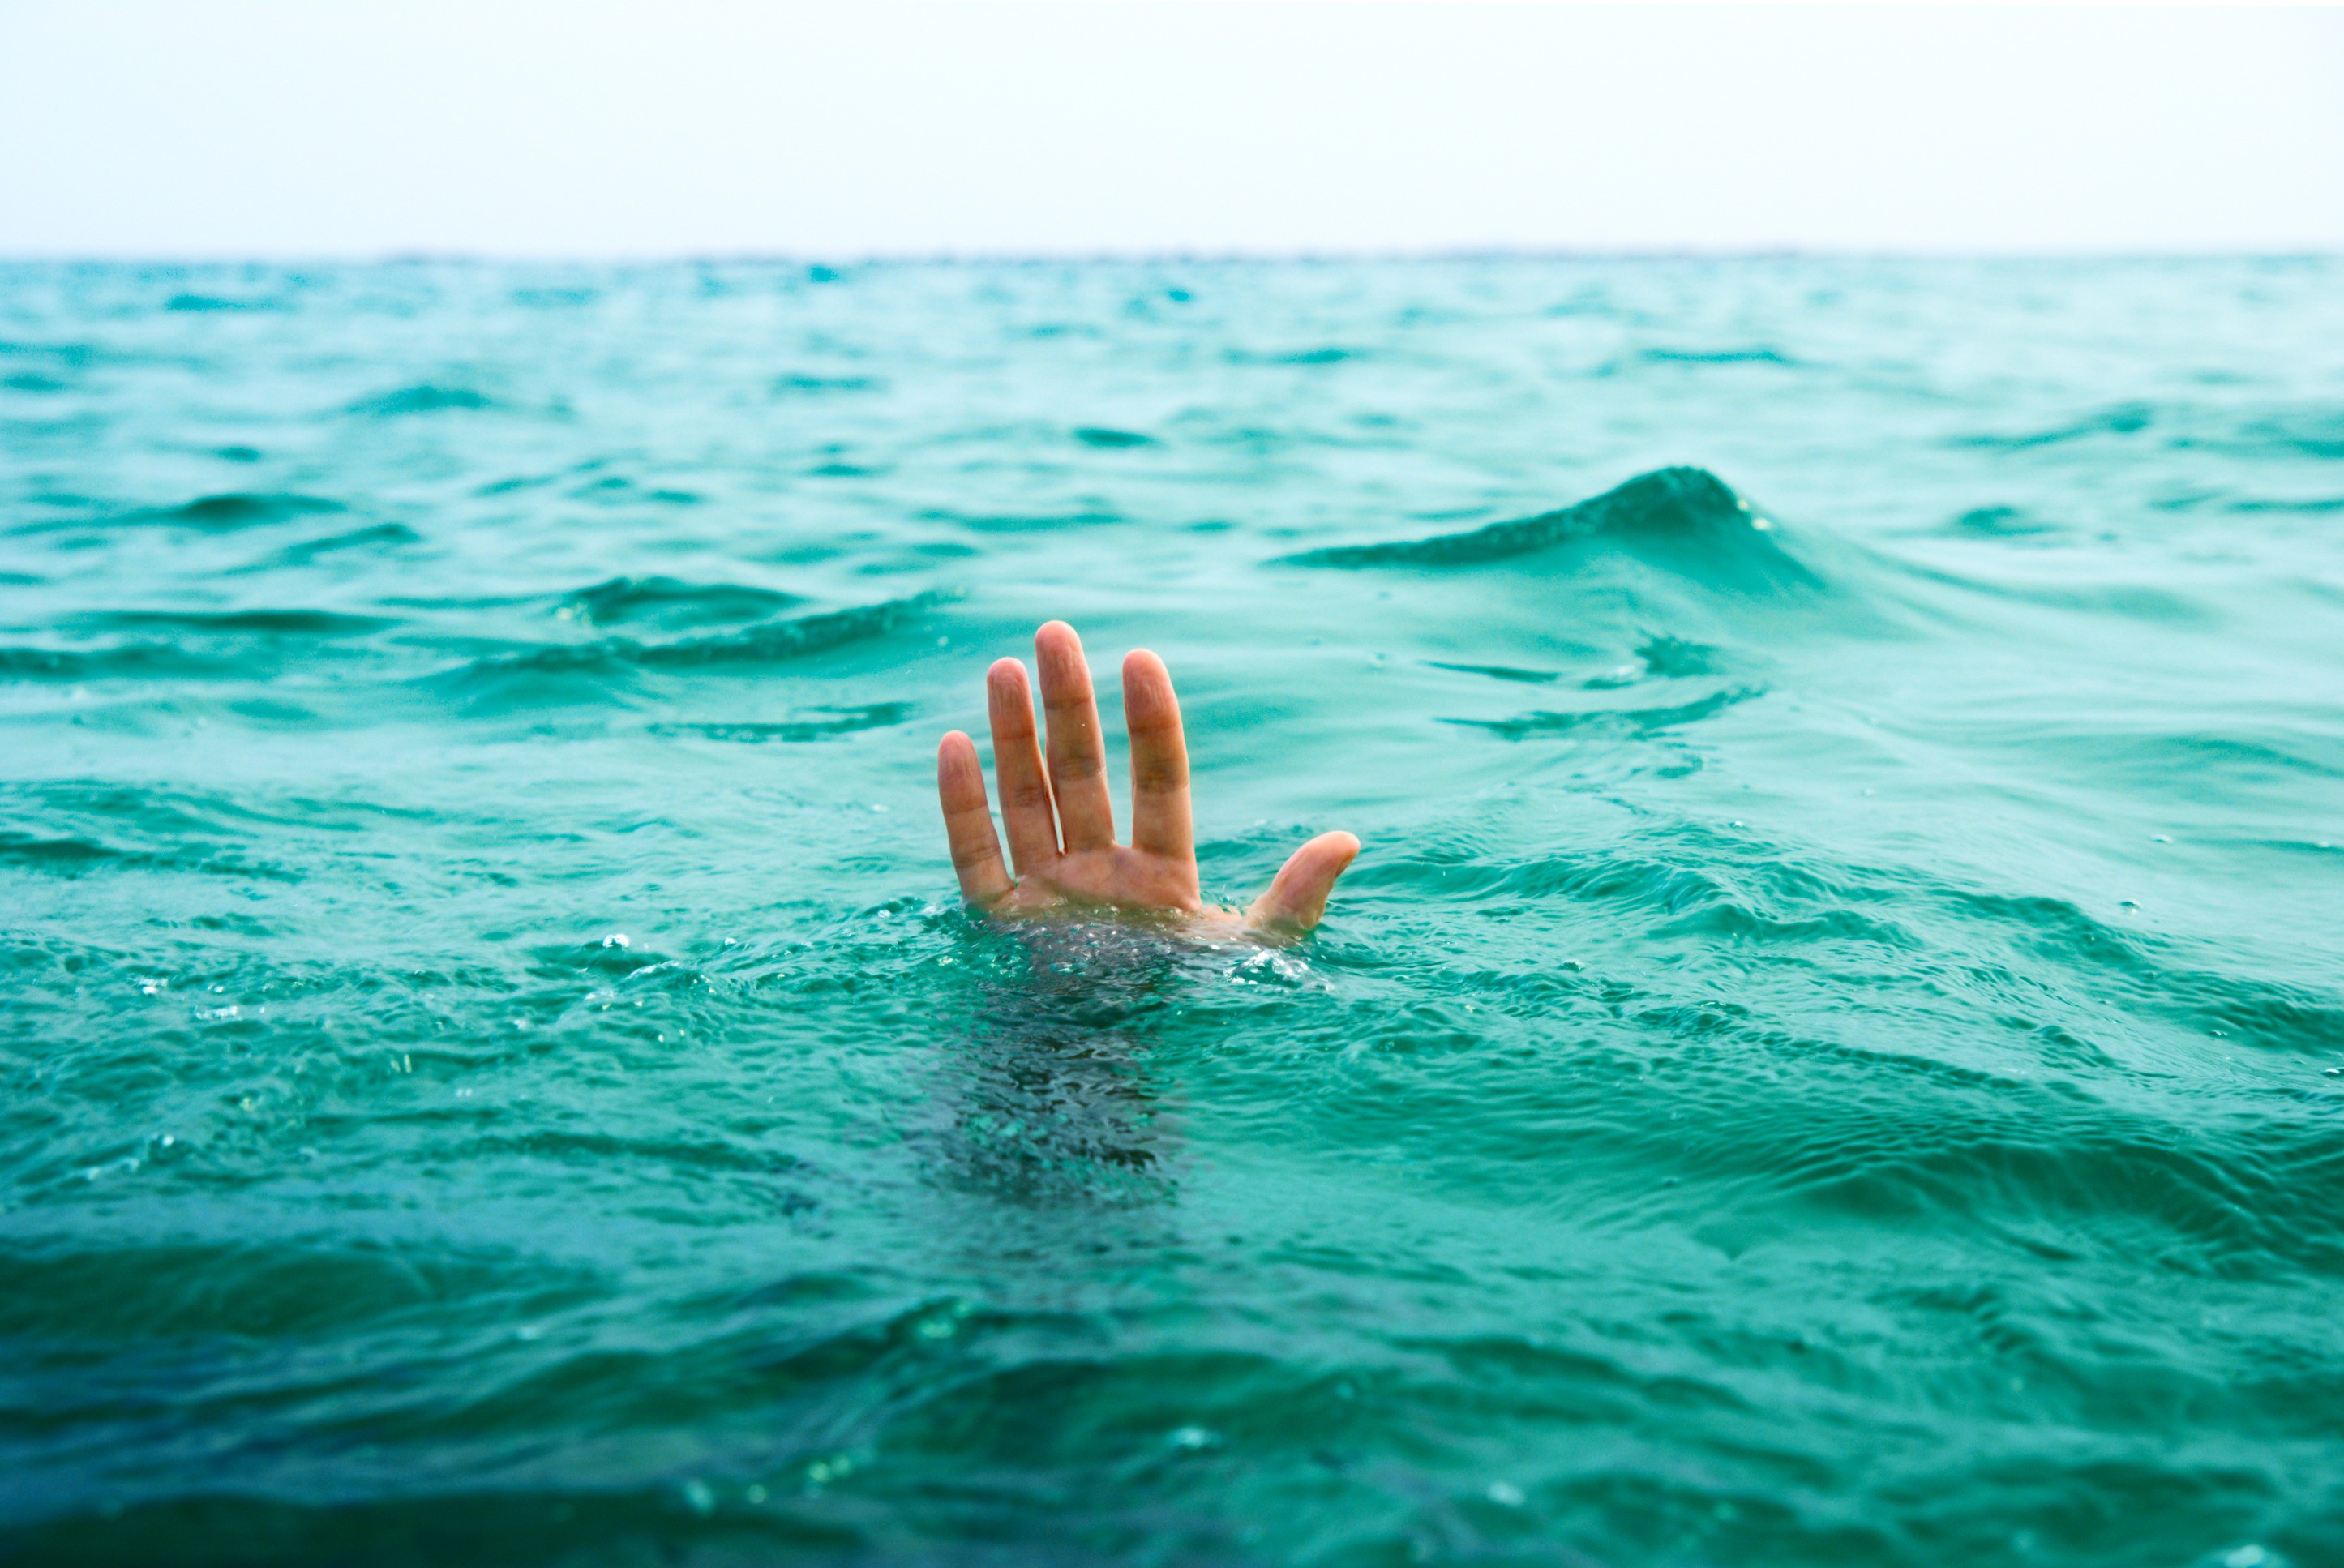 Drown Hands Sea Outdoors Turquoise Drowning 2891x1934